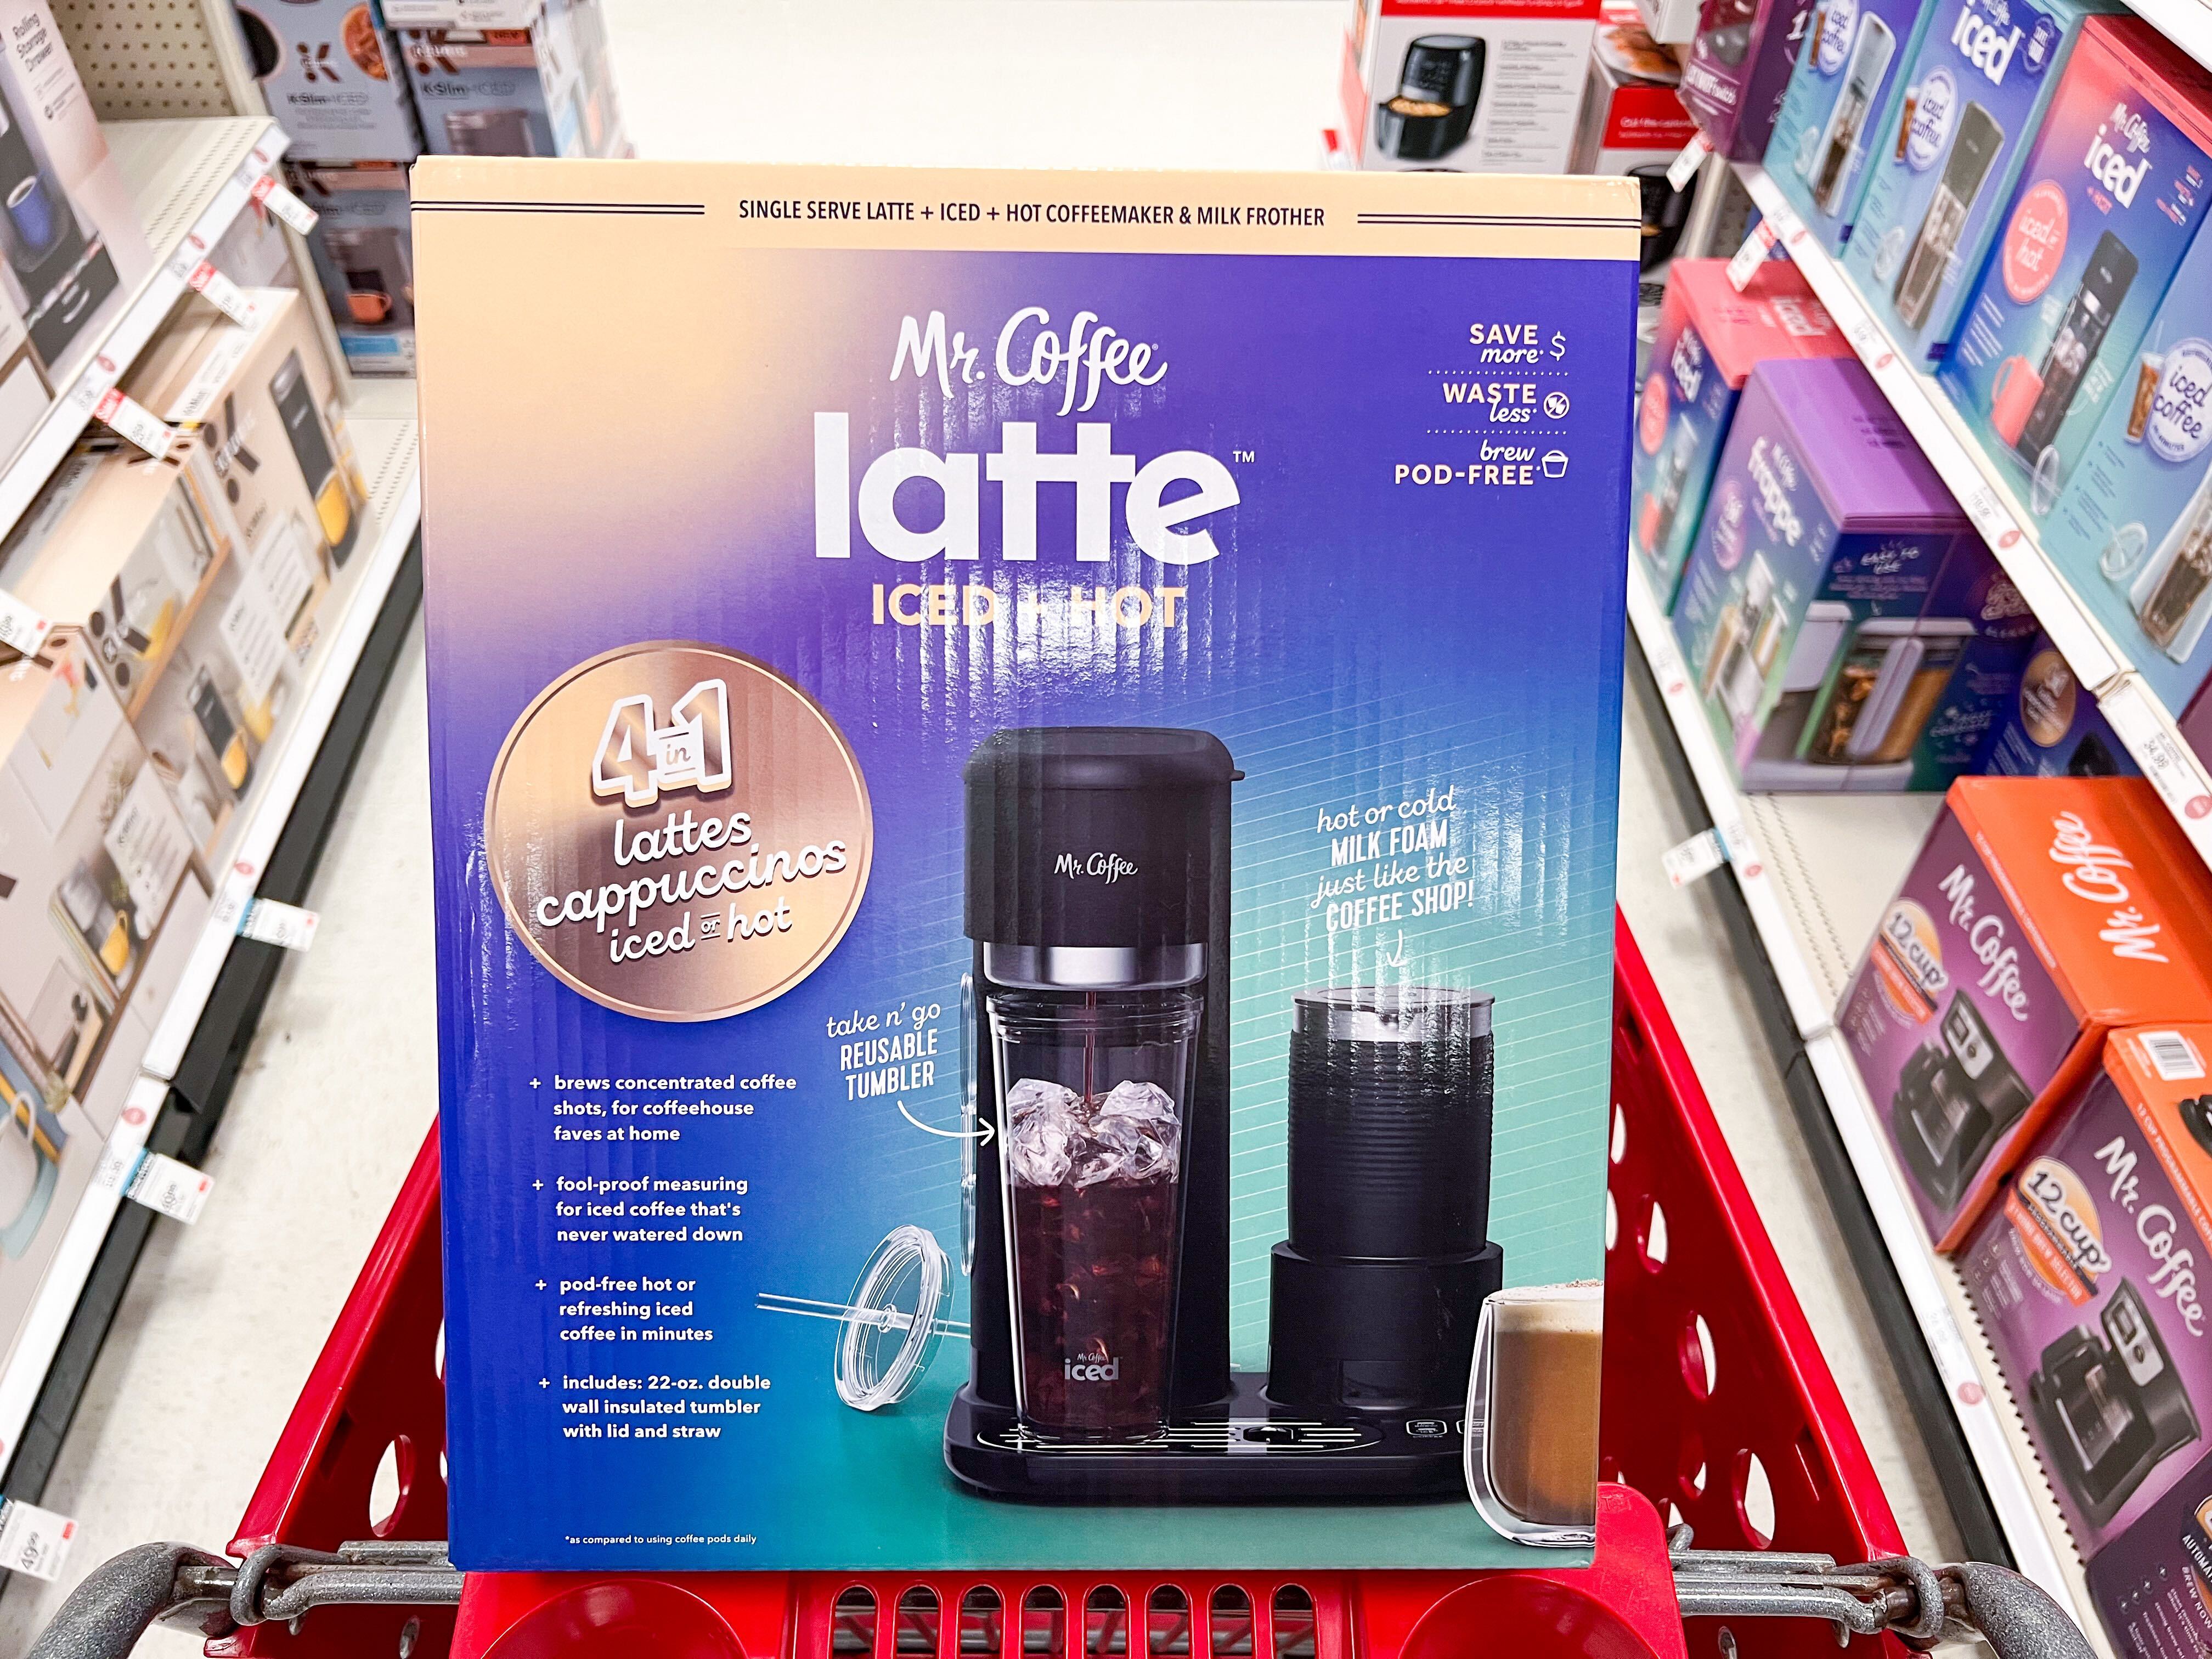 Mr. Coffee 4-in-1 Latte, Iced, and Hot Coffee Maker, Only $52.48 at Target  - The Krazy Coupon Lady